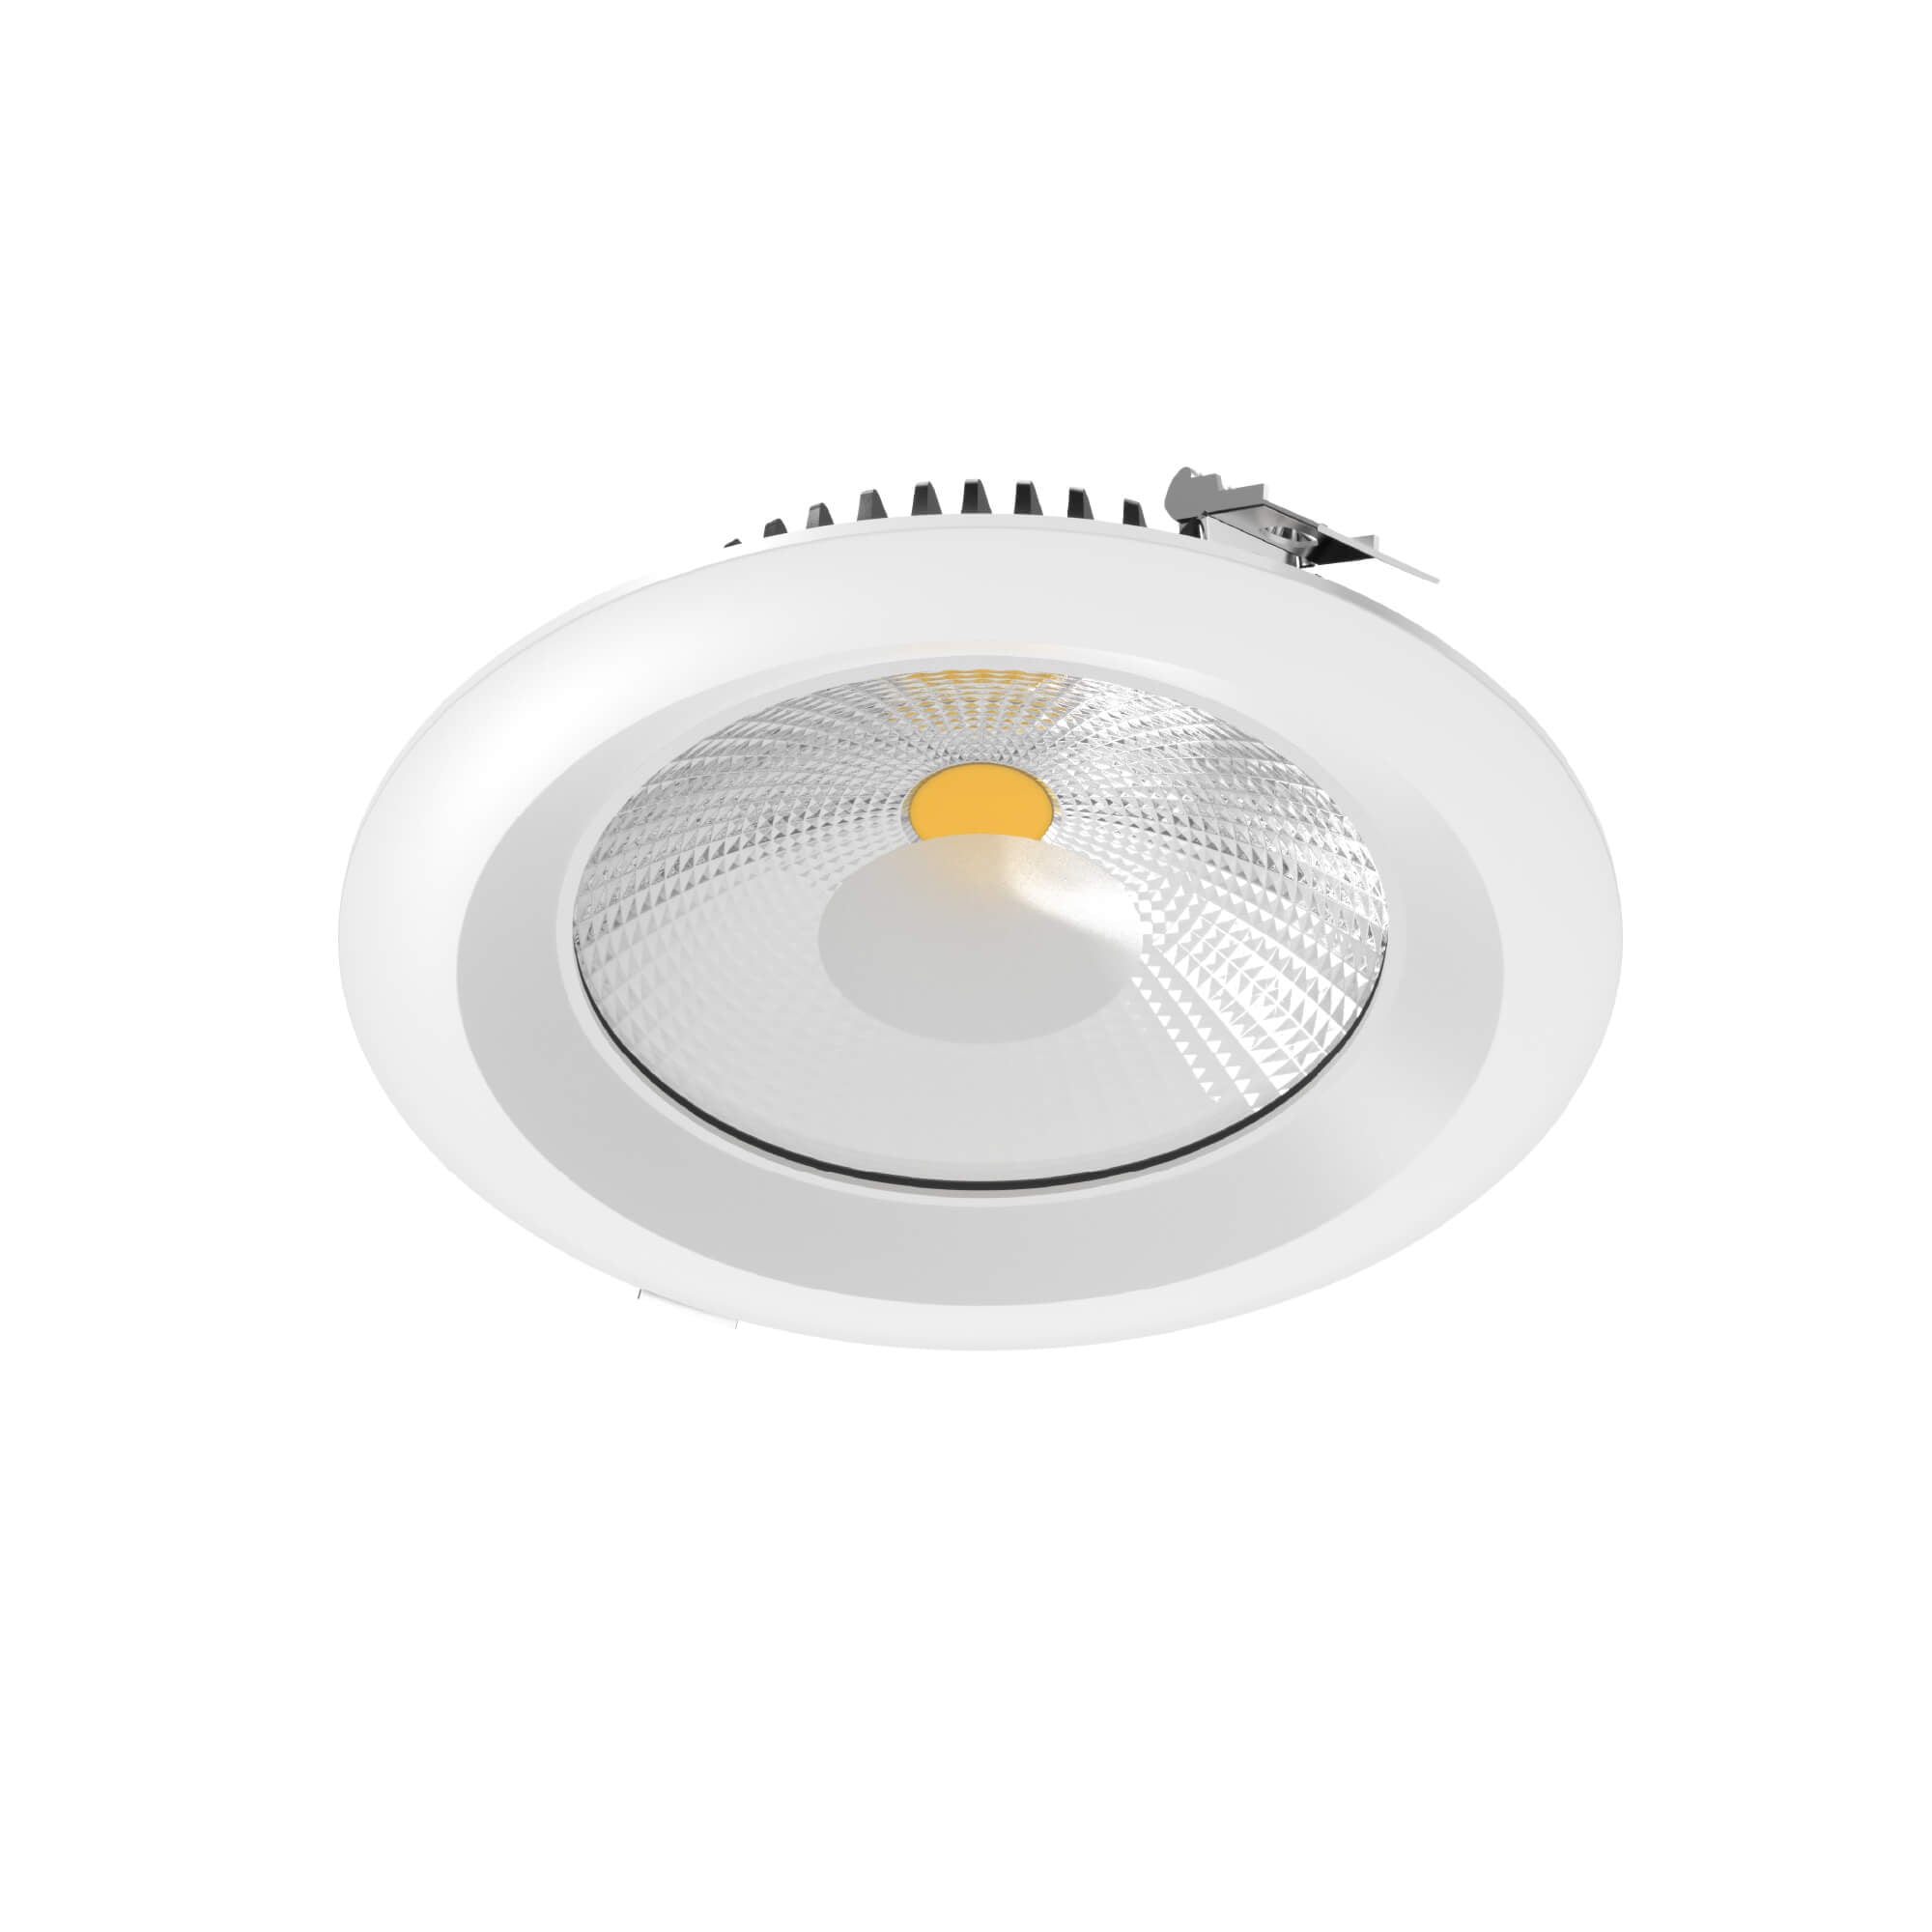 8" High Powered LED Commercial Recessed Trim